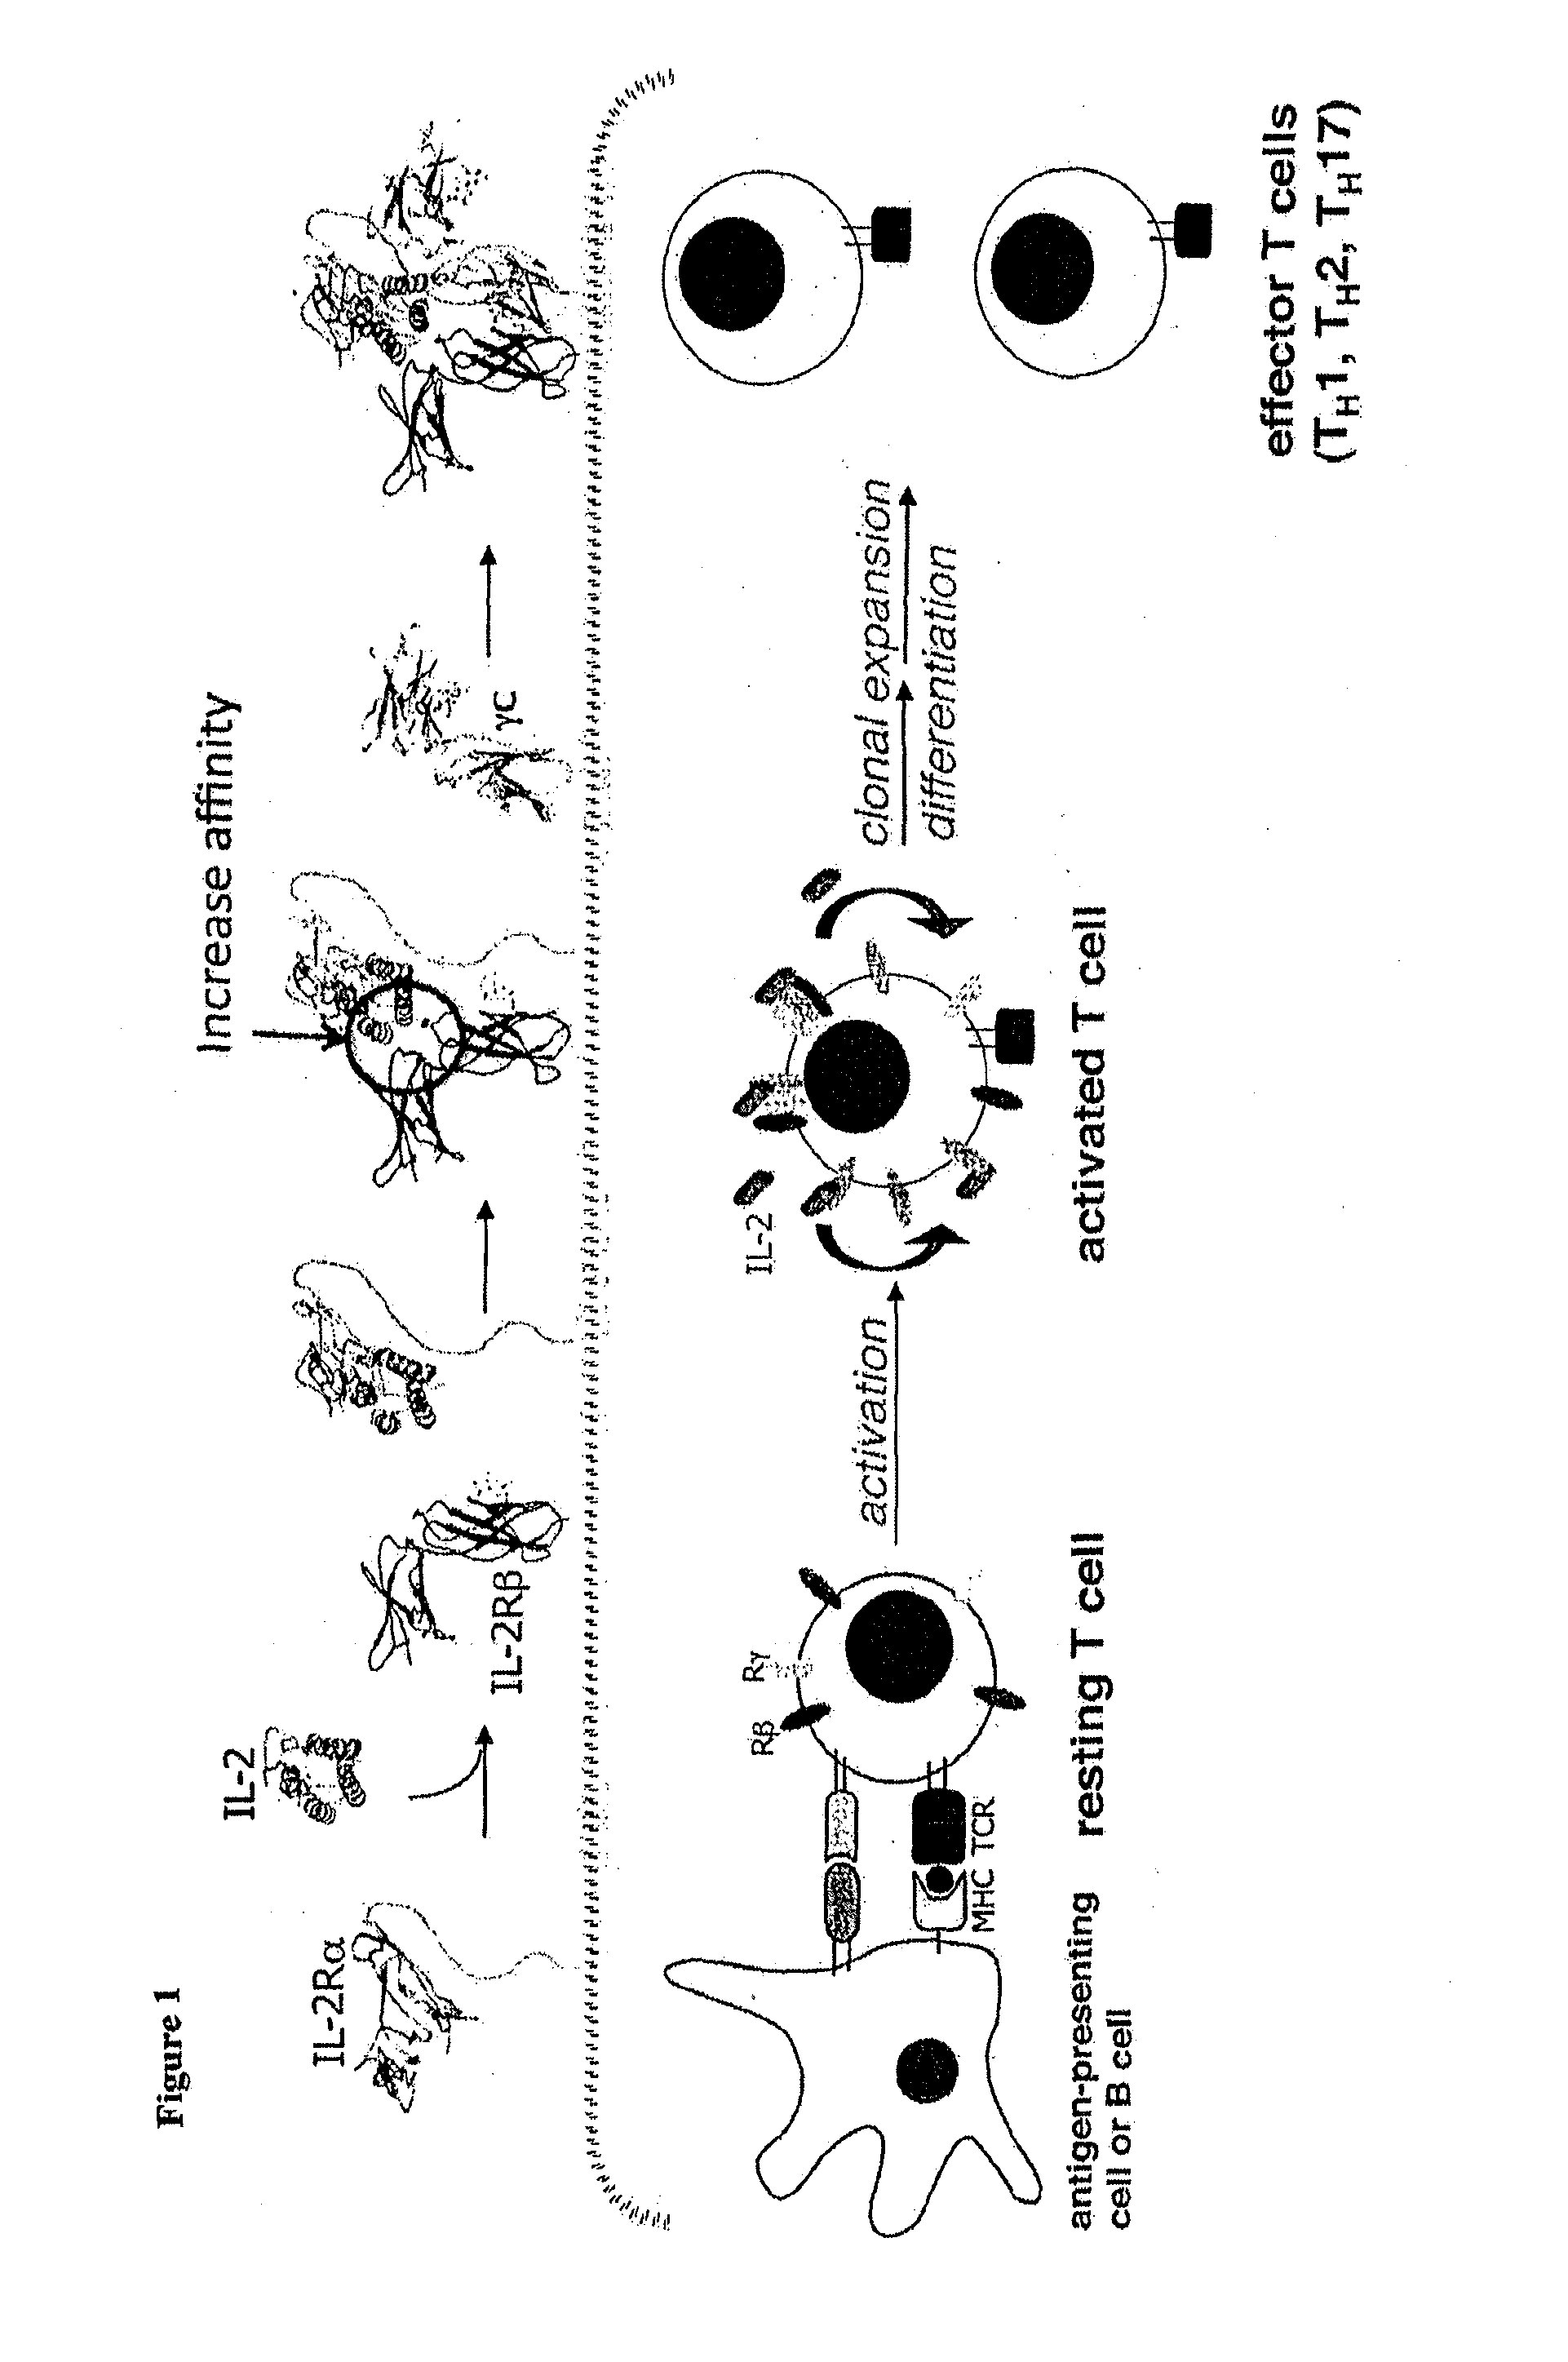 Superagonists and antagonists of interleukin-2